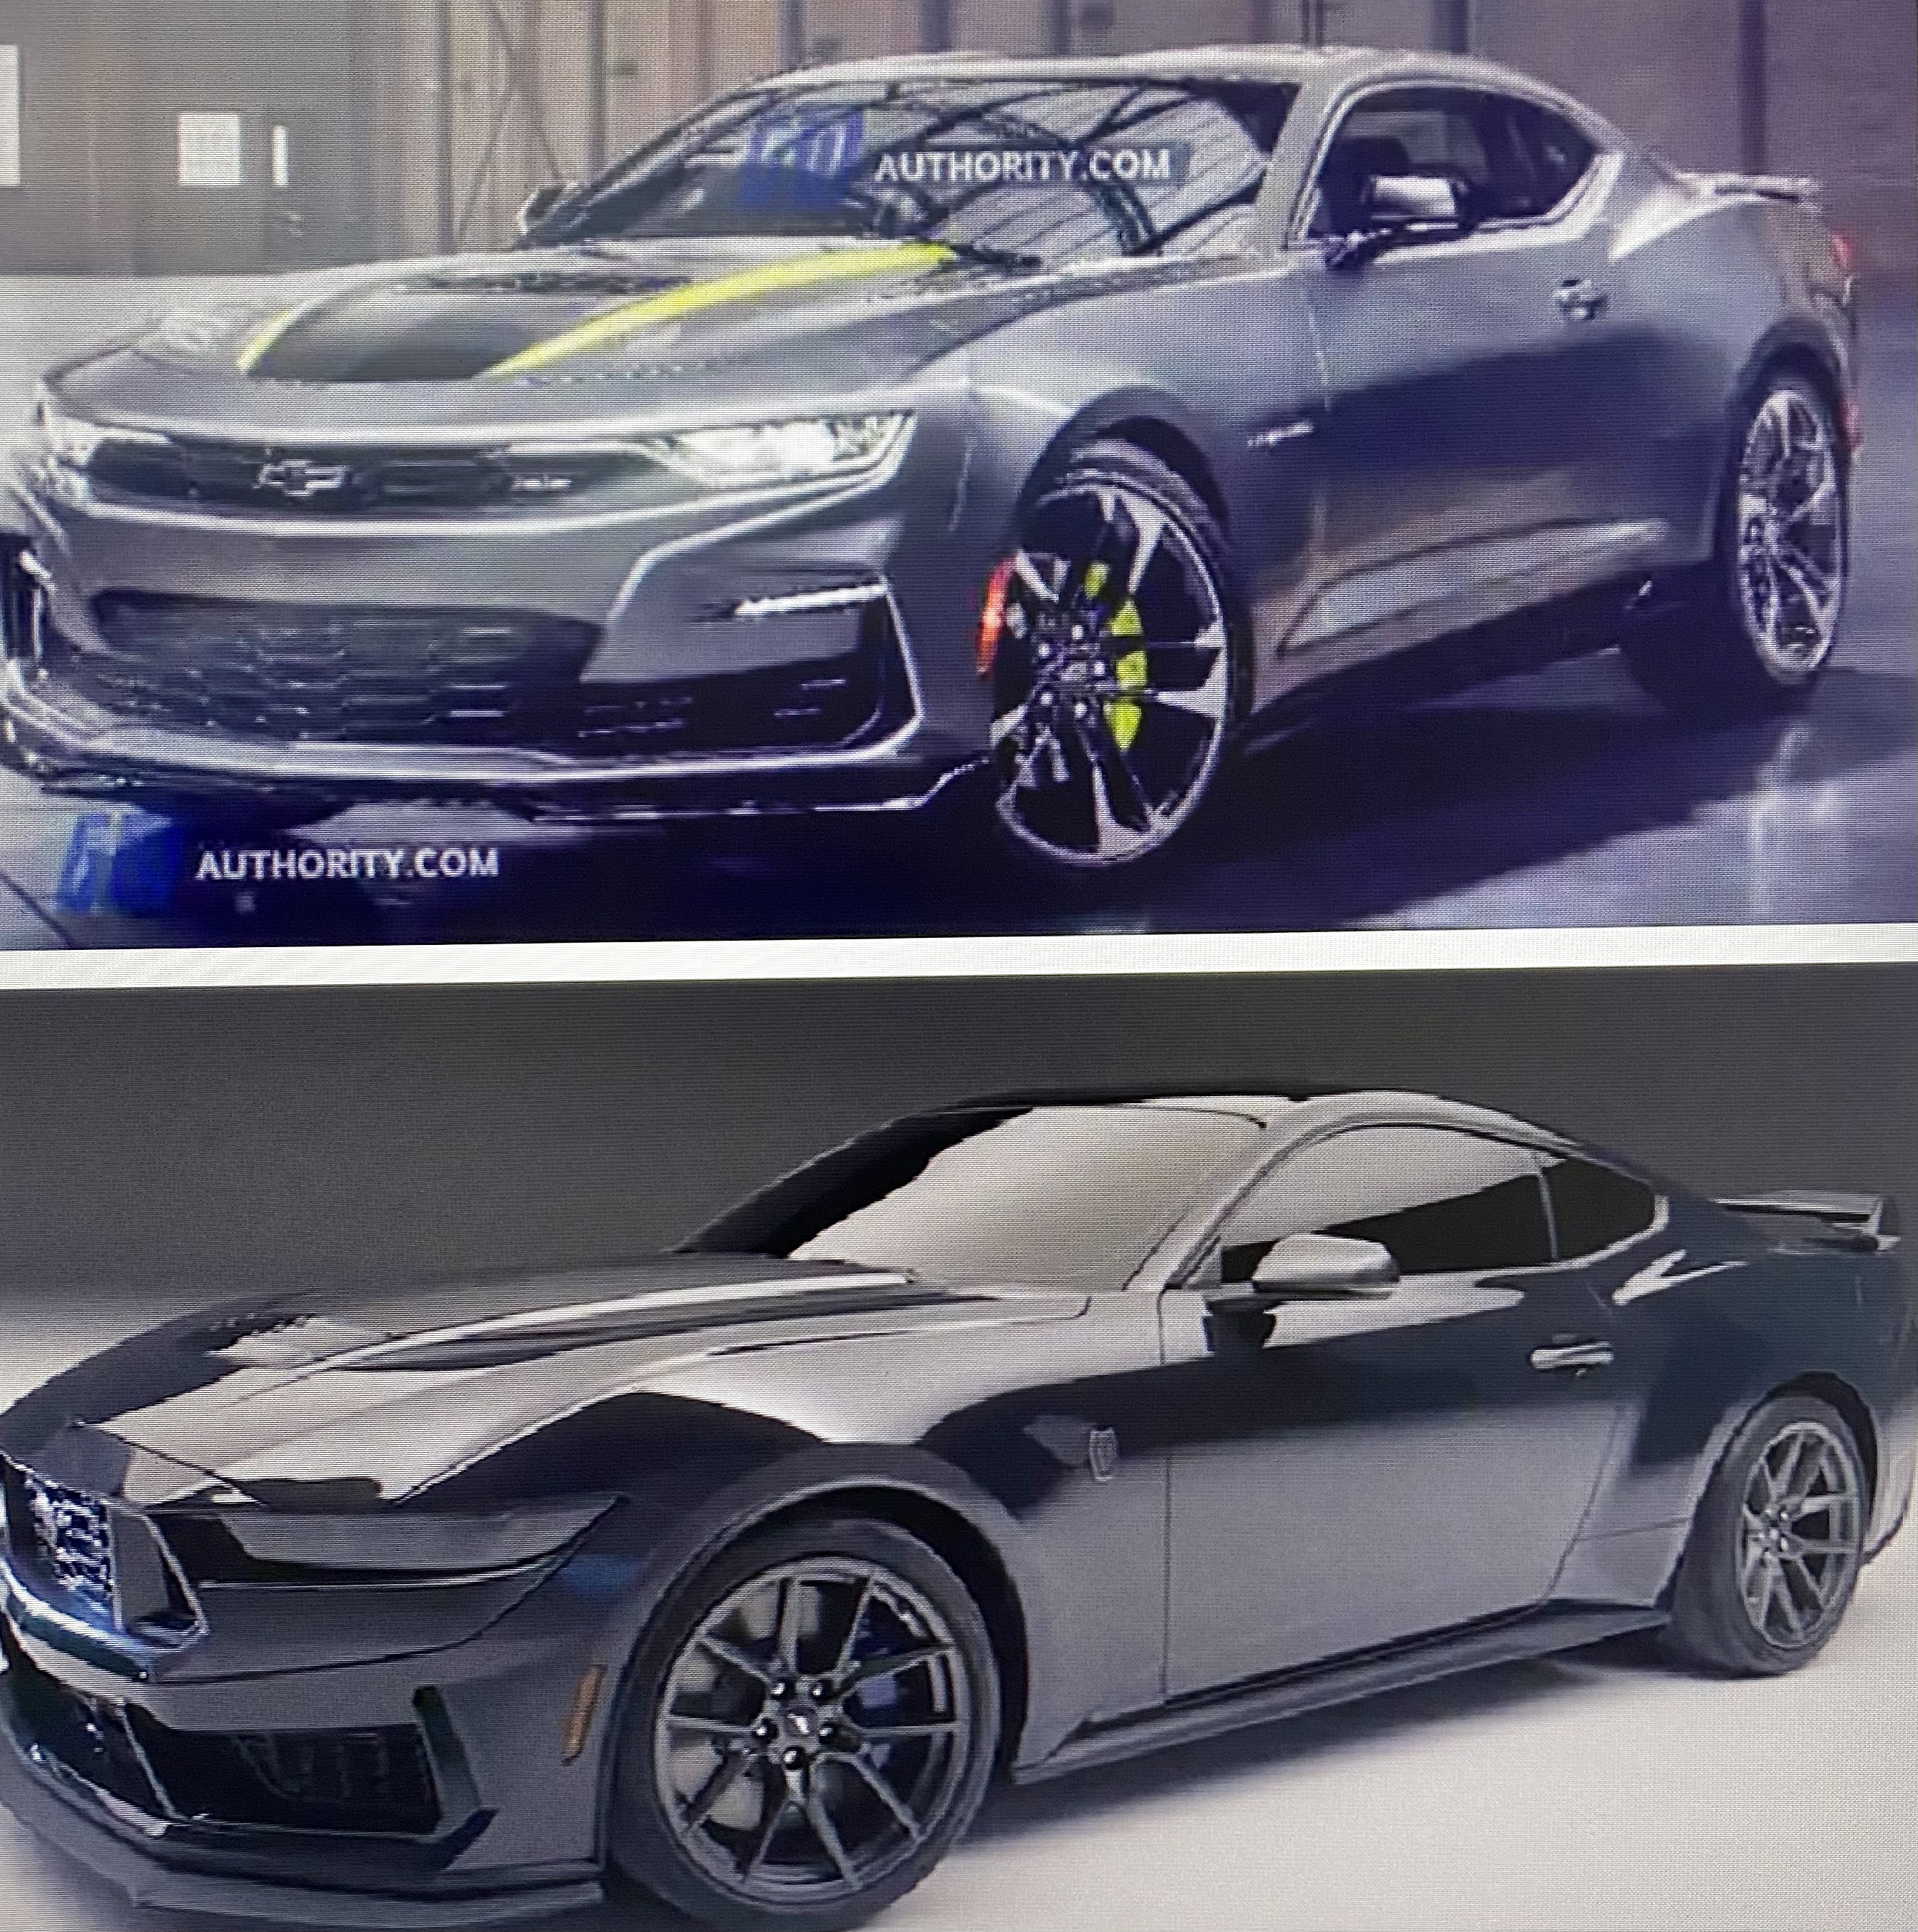 S650 Mustang ⚠️ LEAKED S650 Mustang Images & Rumored Specs!! [New Shots & Engine Image Added] F791EE42-50A8-4CE1-A497-450F208DAE70